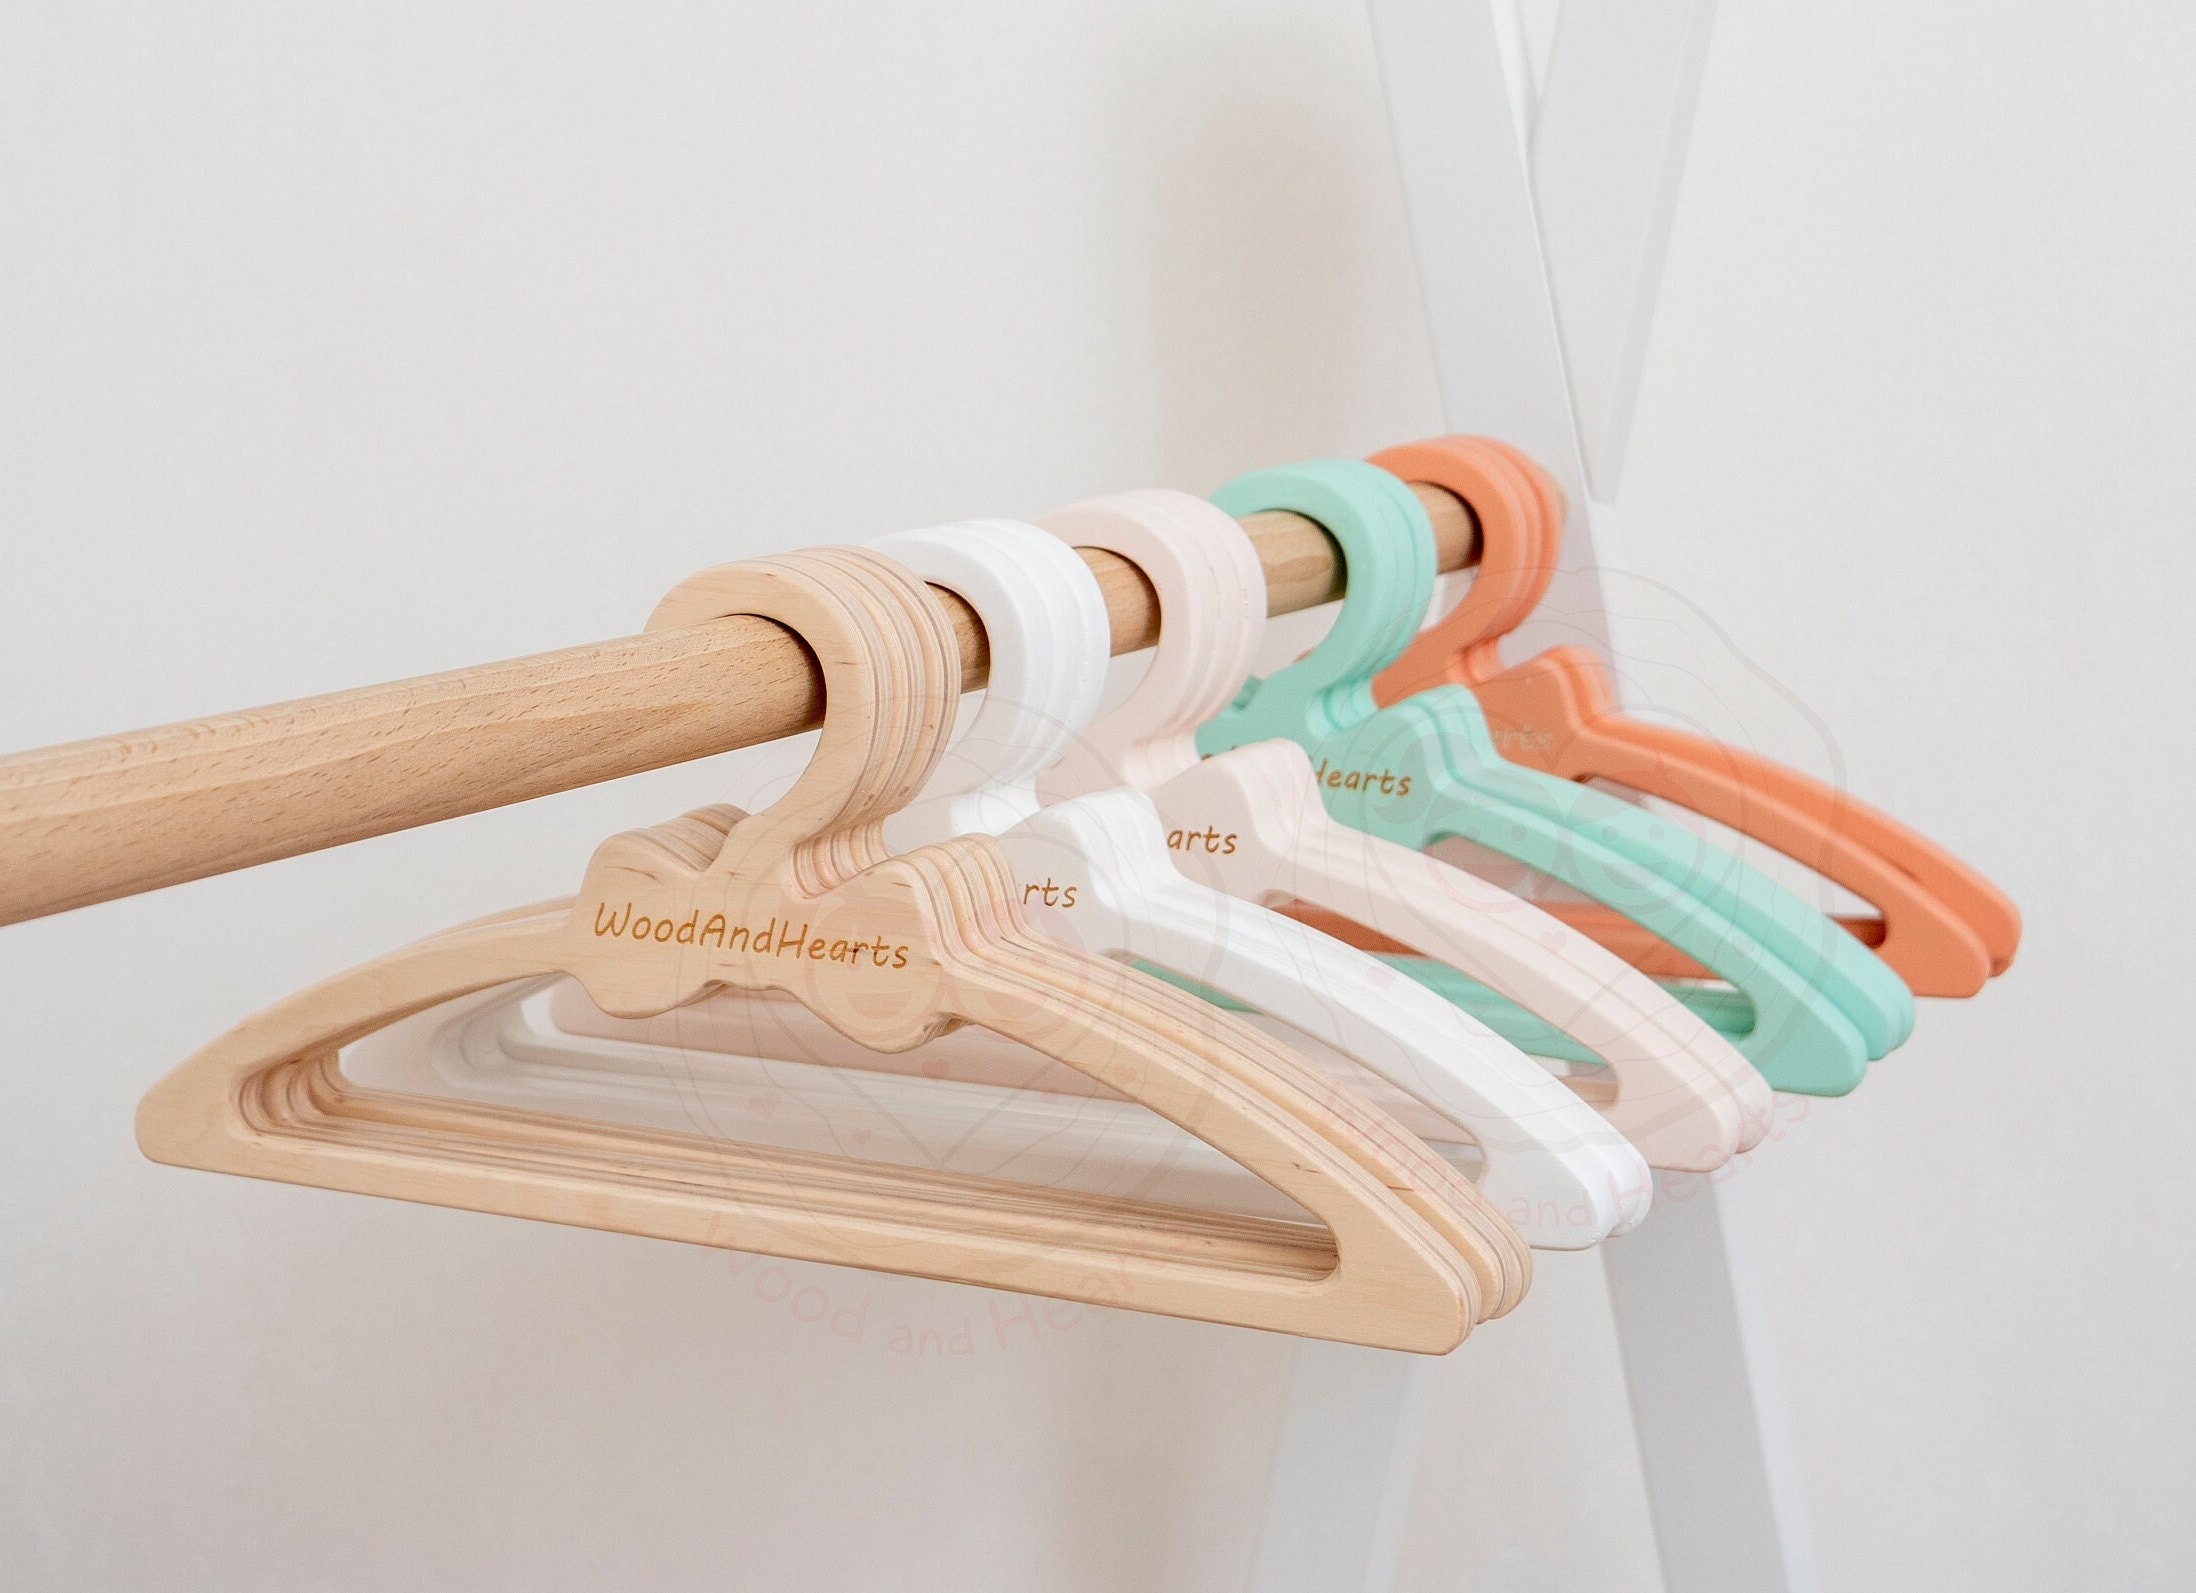 NAHANCO Wooden Baby/Infant Hangers, 10 - Low Gloss White